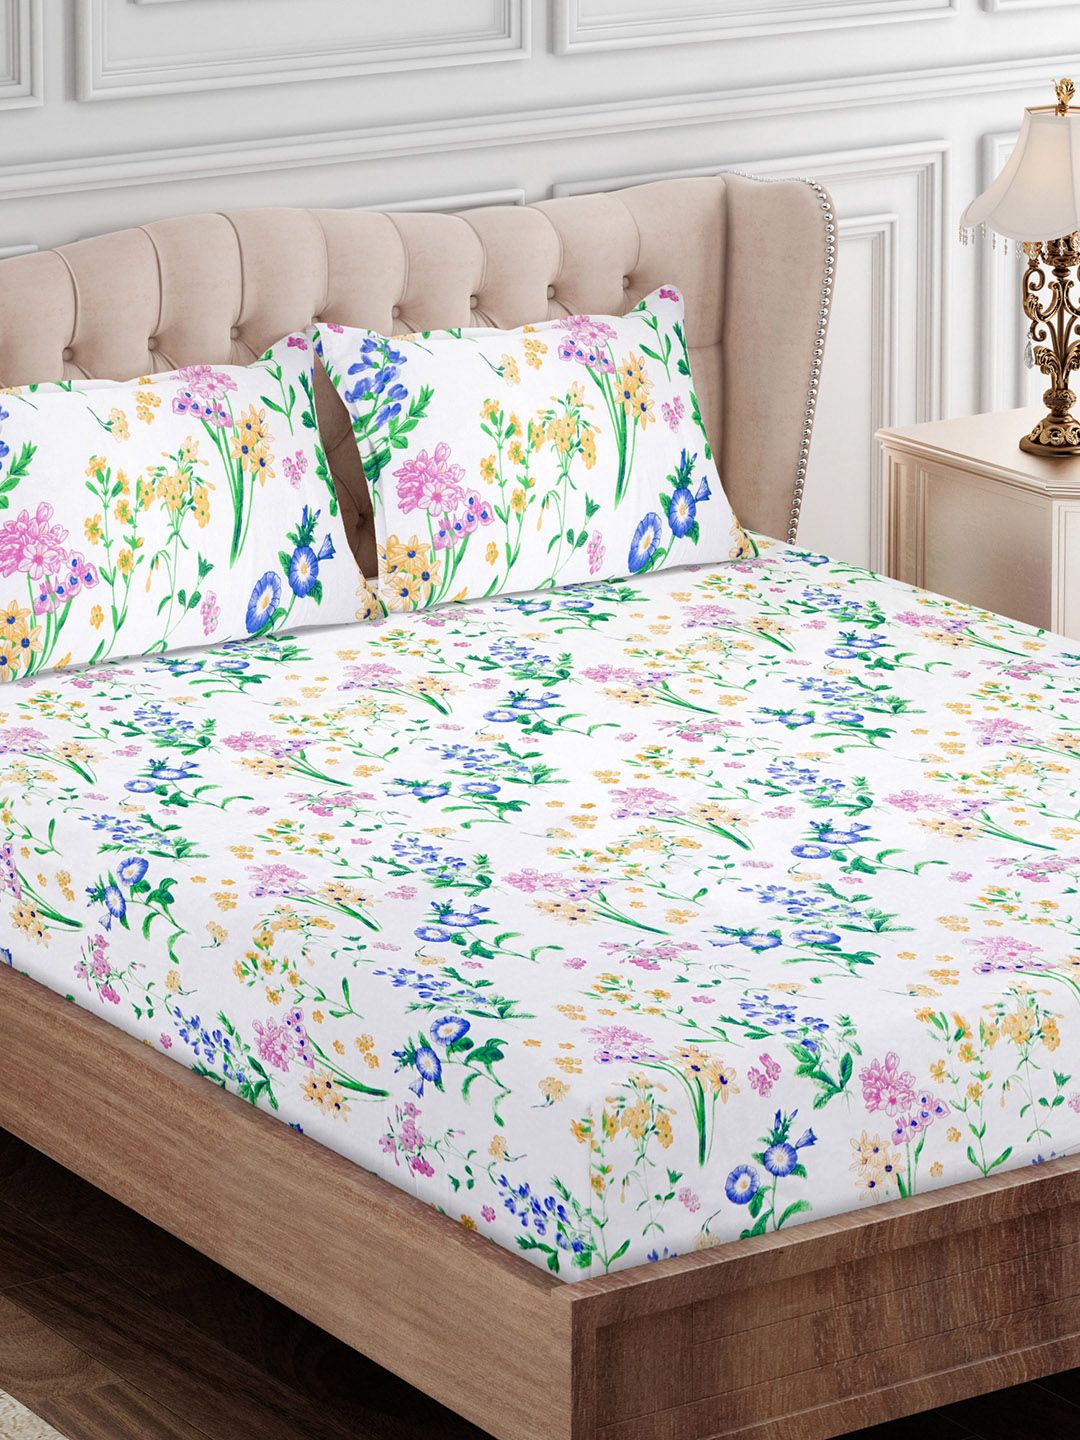 SEJ by Nisha Gupta Purple & Green Floral 180 TC King Bedsheet with 2 Pillow Covers Price in India